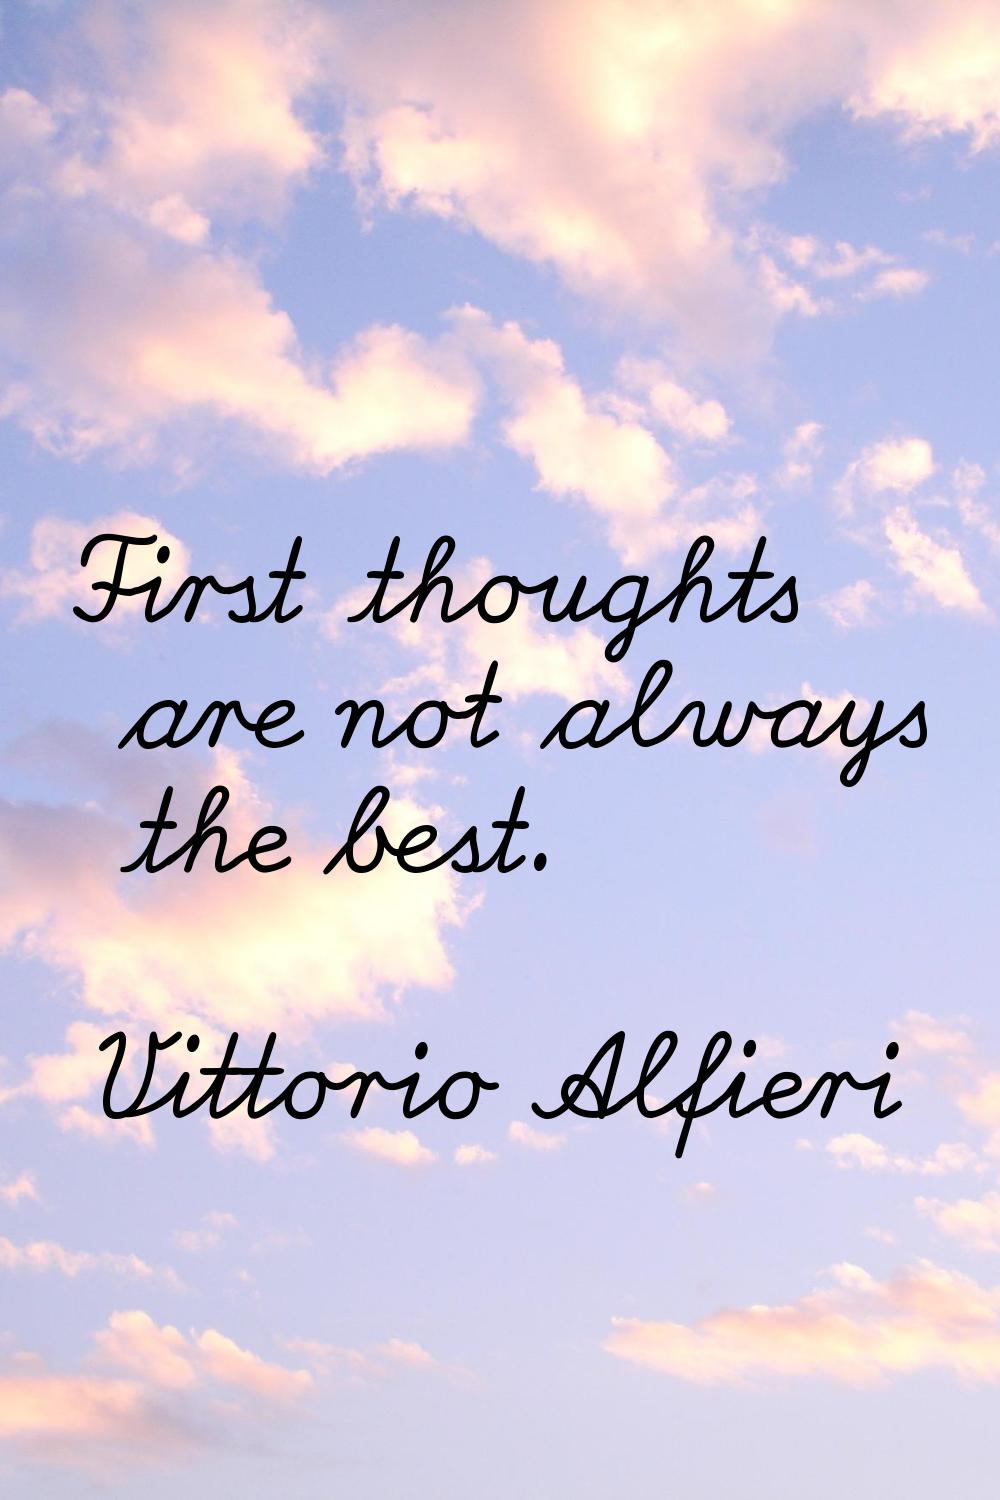 First thoughts are not always the best.